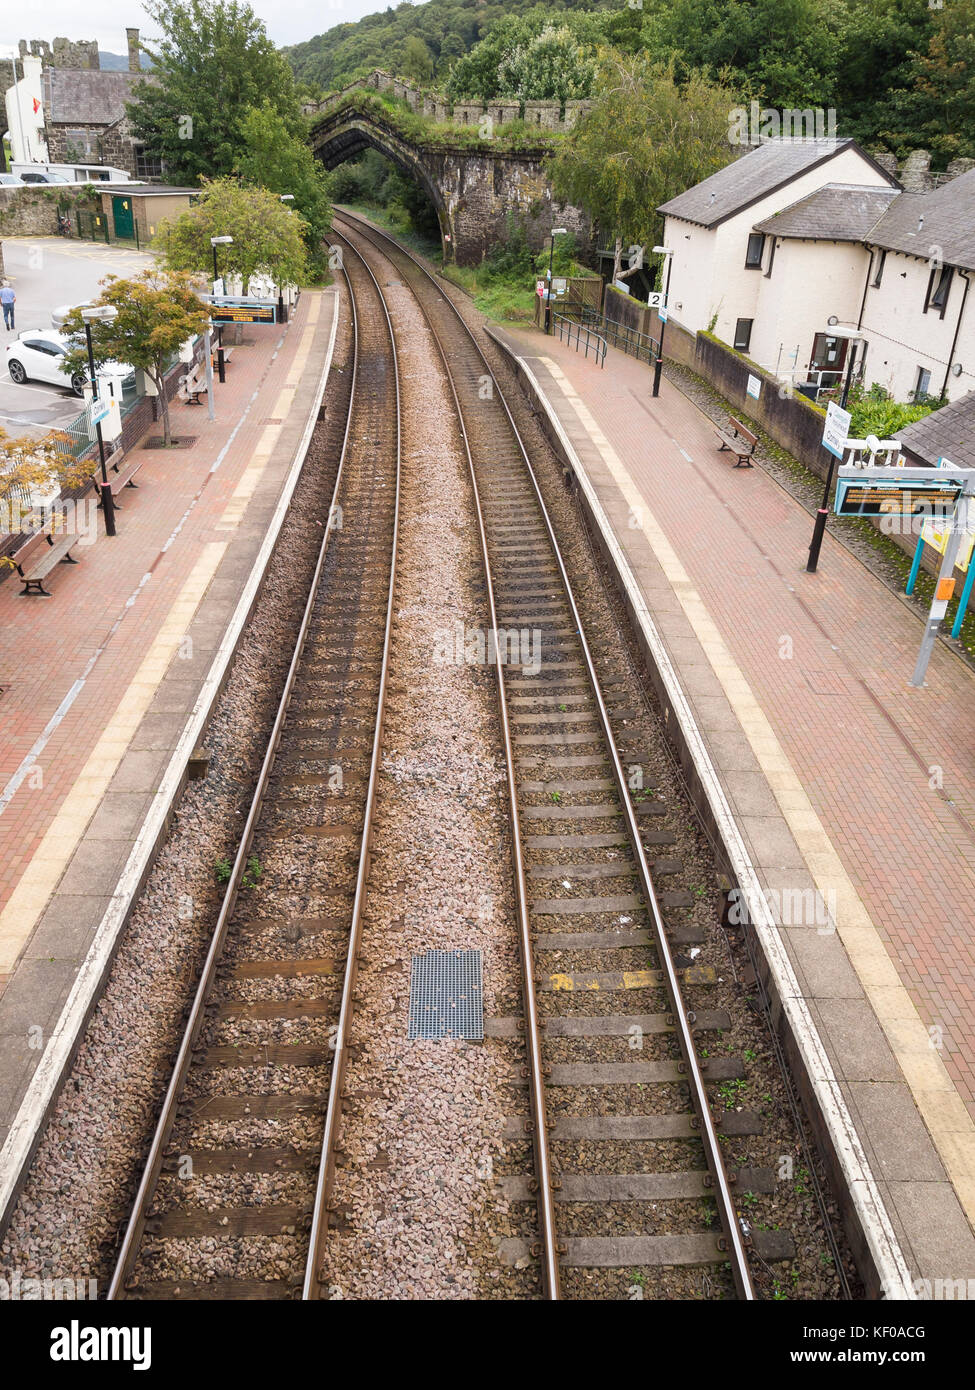 railway tracks high viewpoint at station Stock Photo